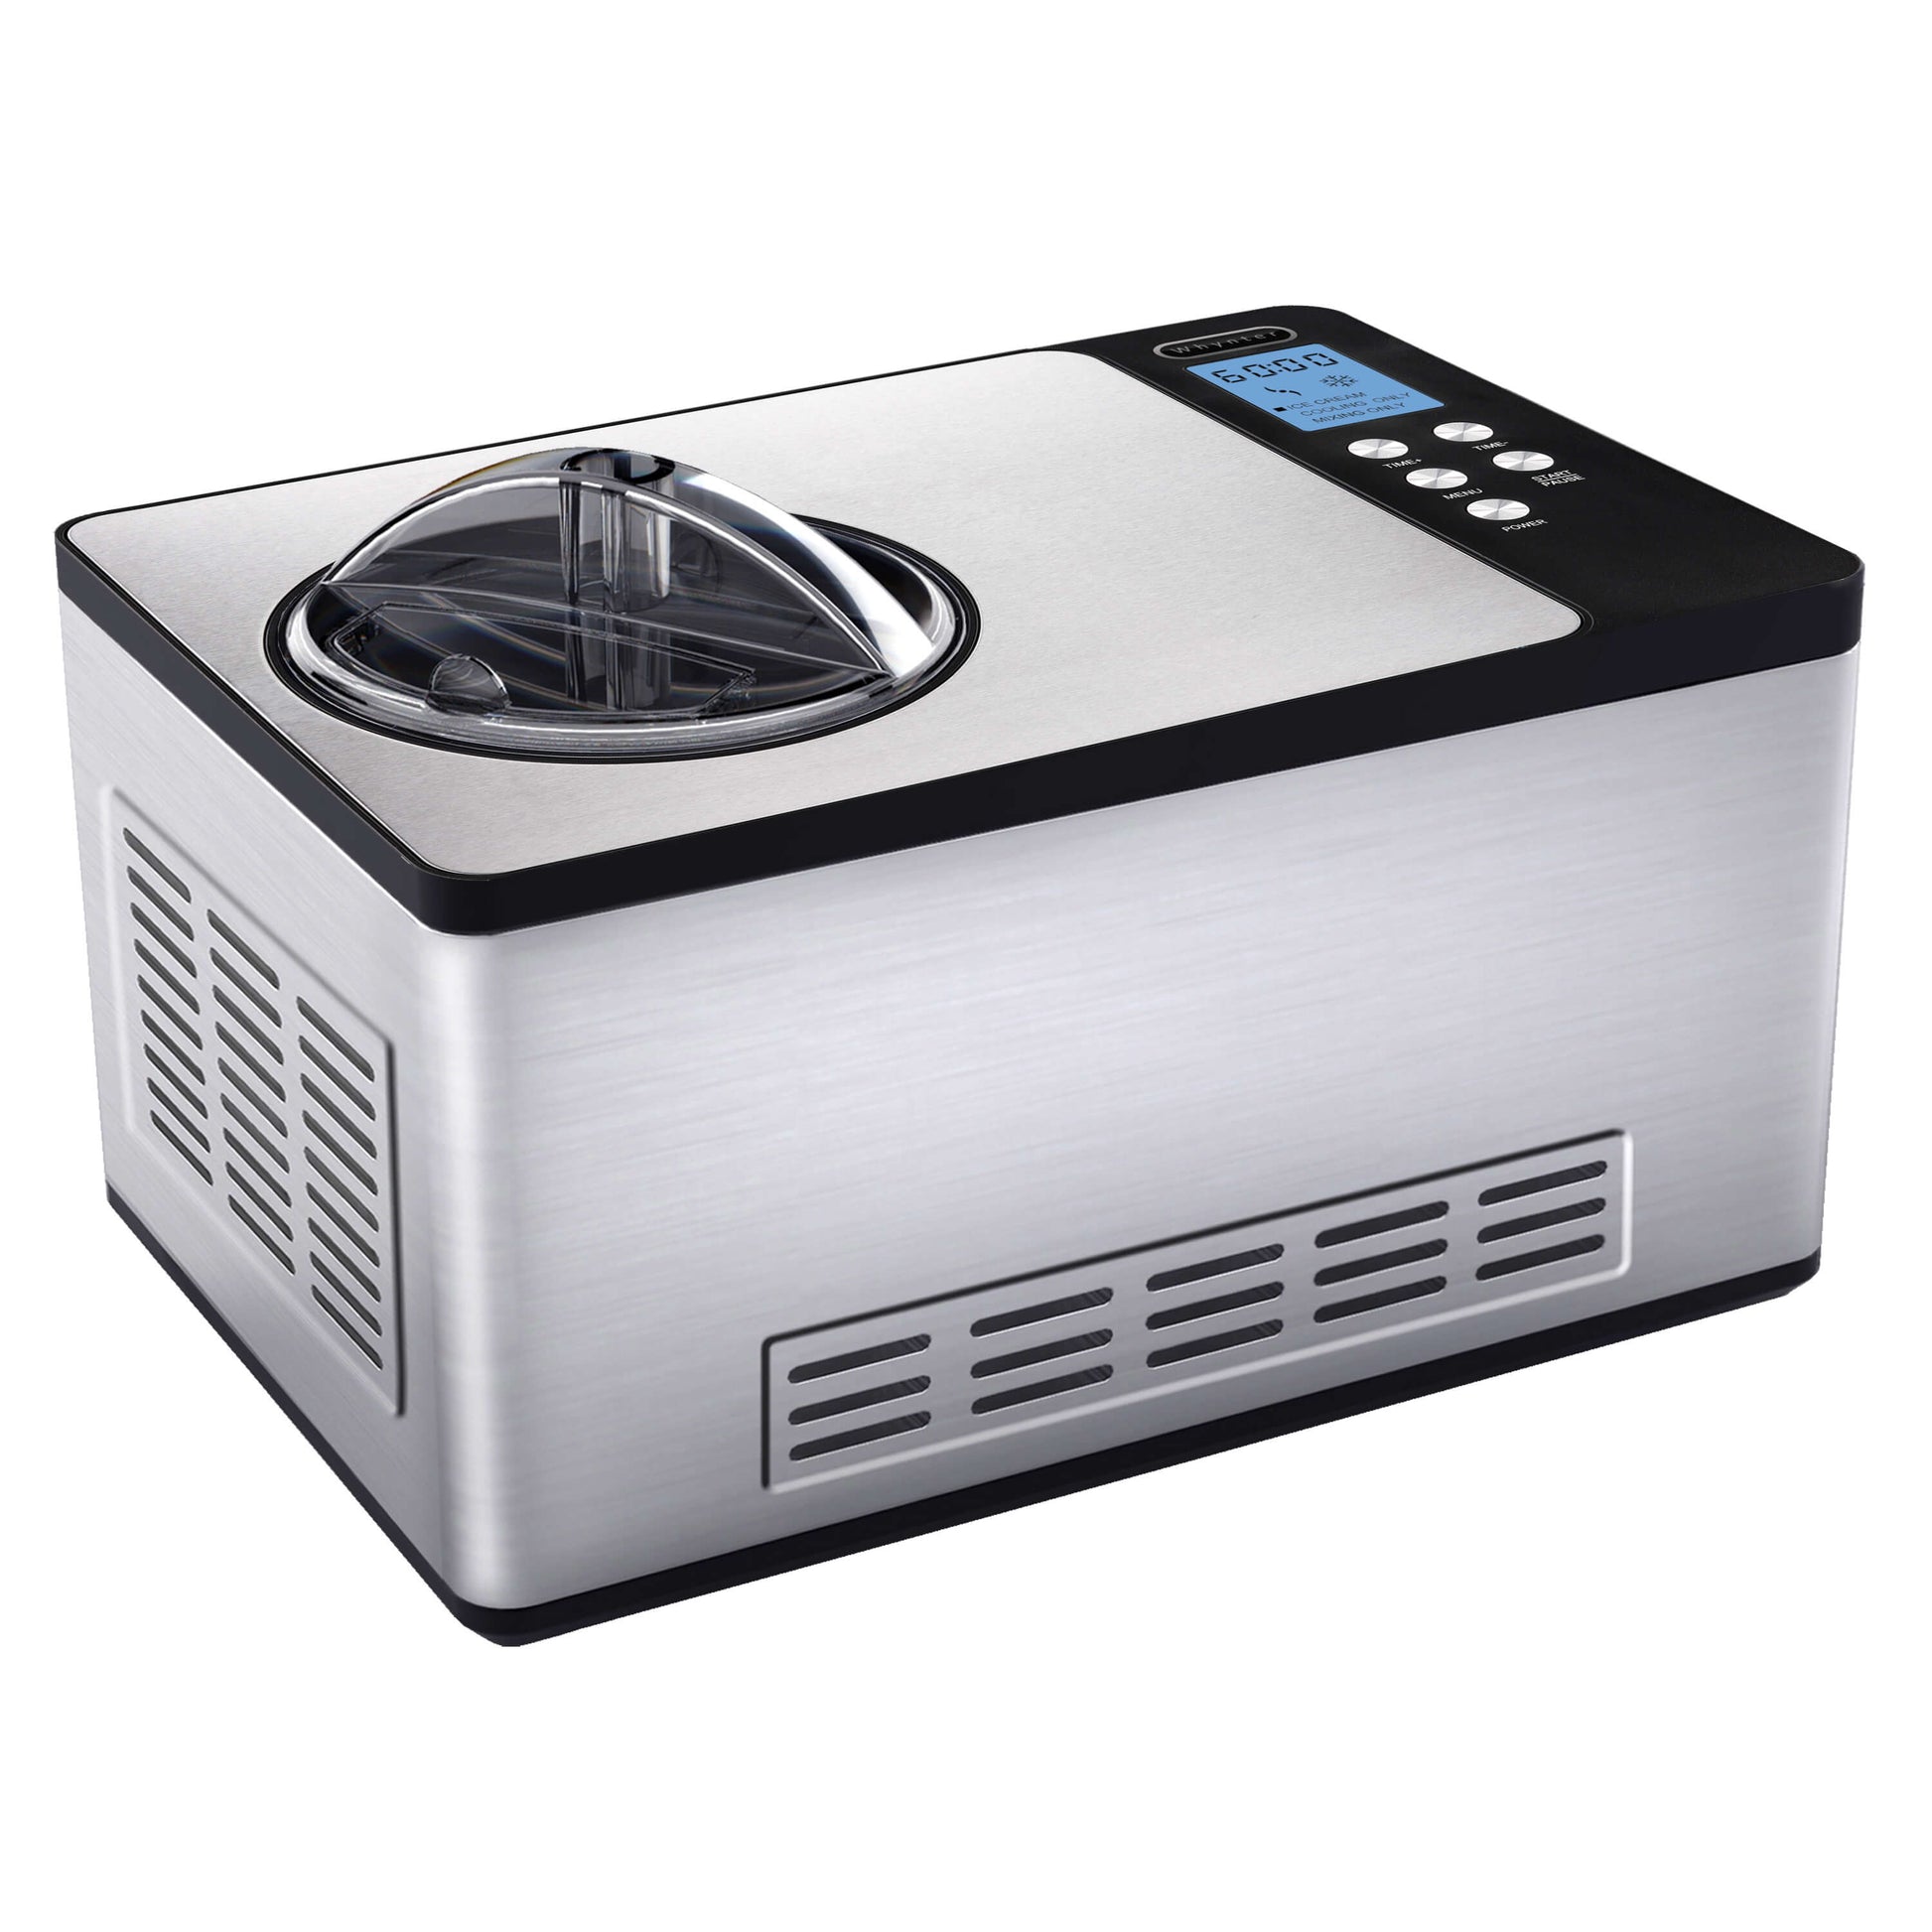 Whynter Ice Cream Makers Whynter ICM-200LS 2.1 Quart Capacity Automatic Compressor Ice Cream Maker in Stainless Steel